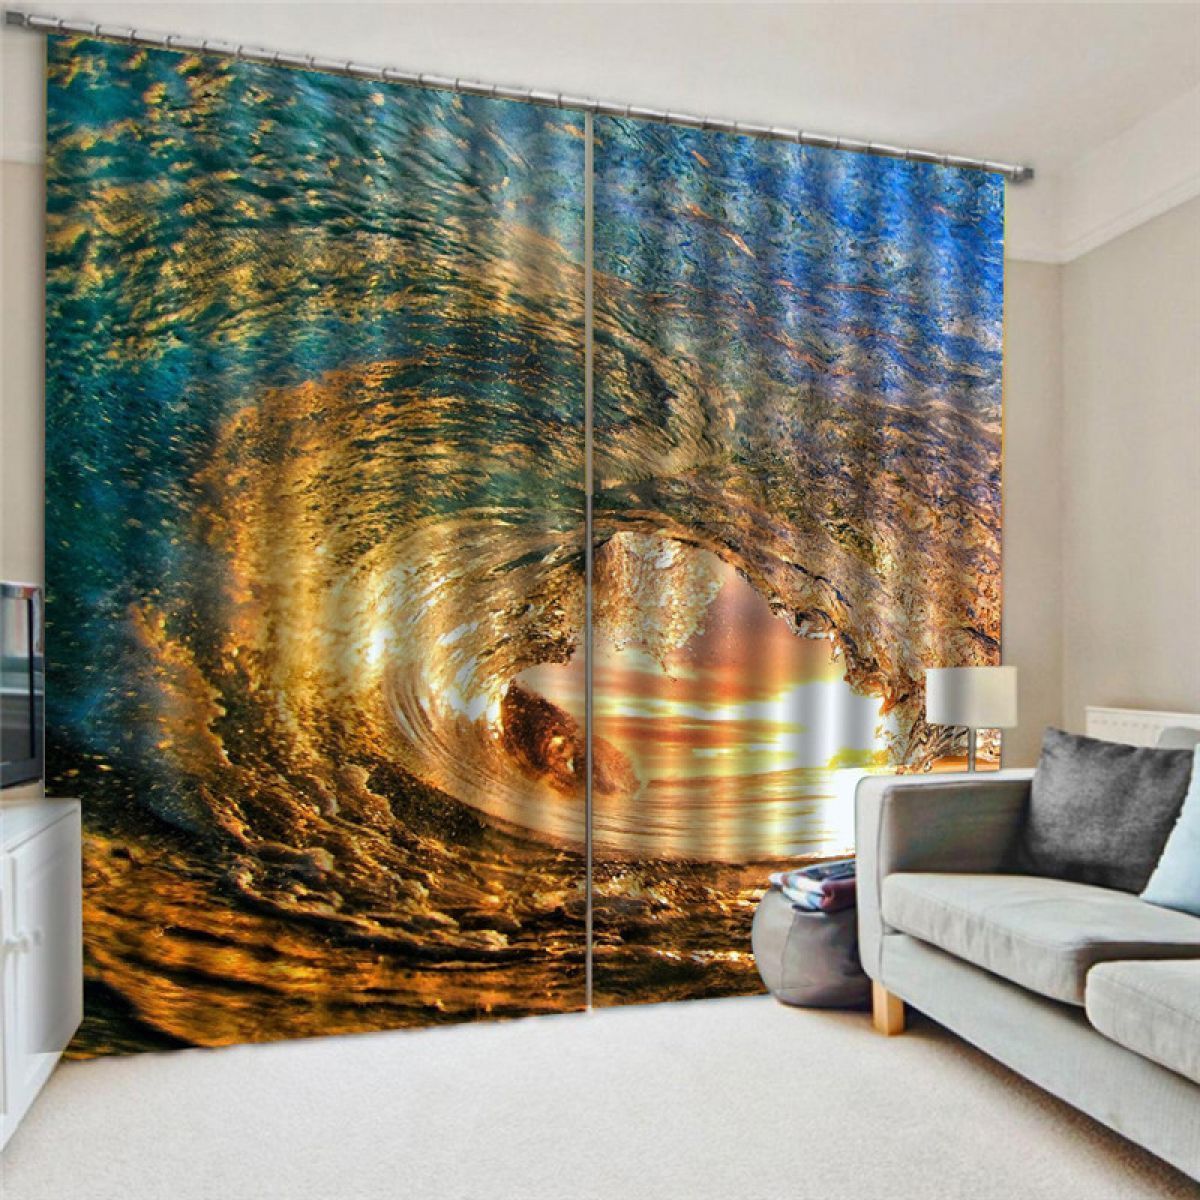 3d Giant Wave Printed Window Curtain Home Decor